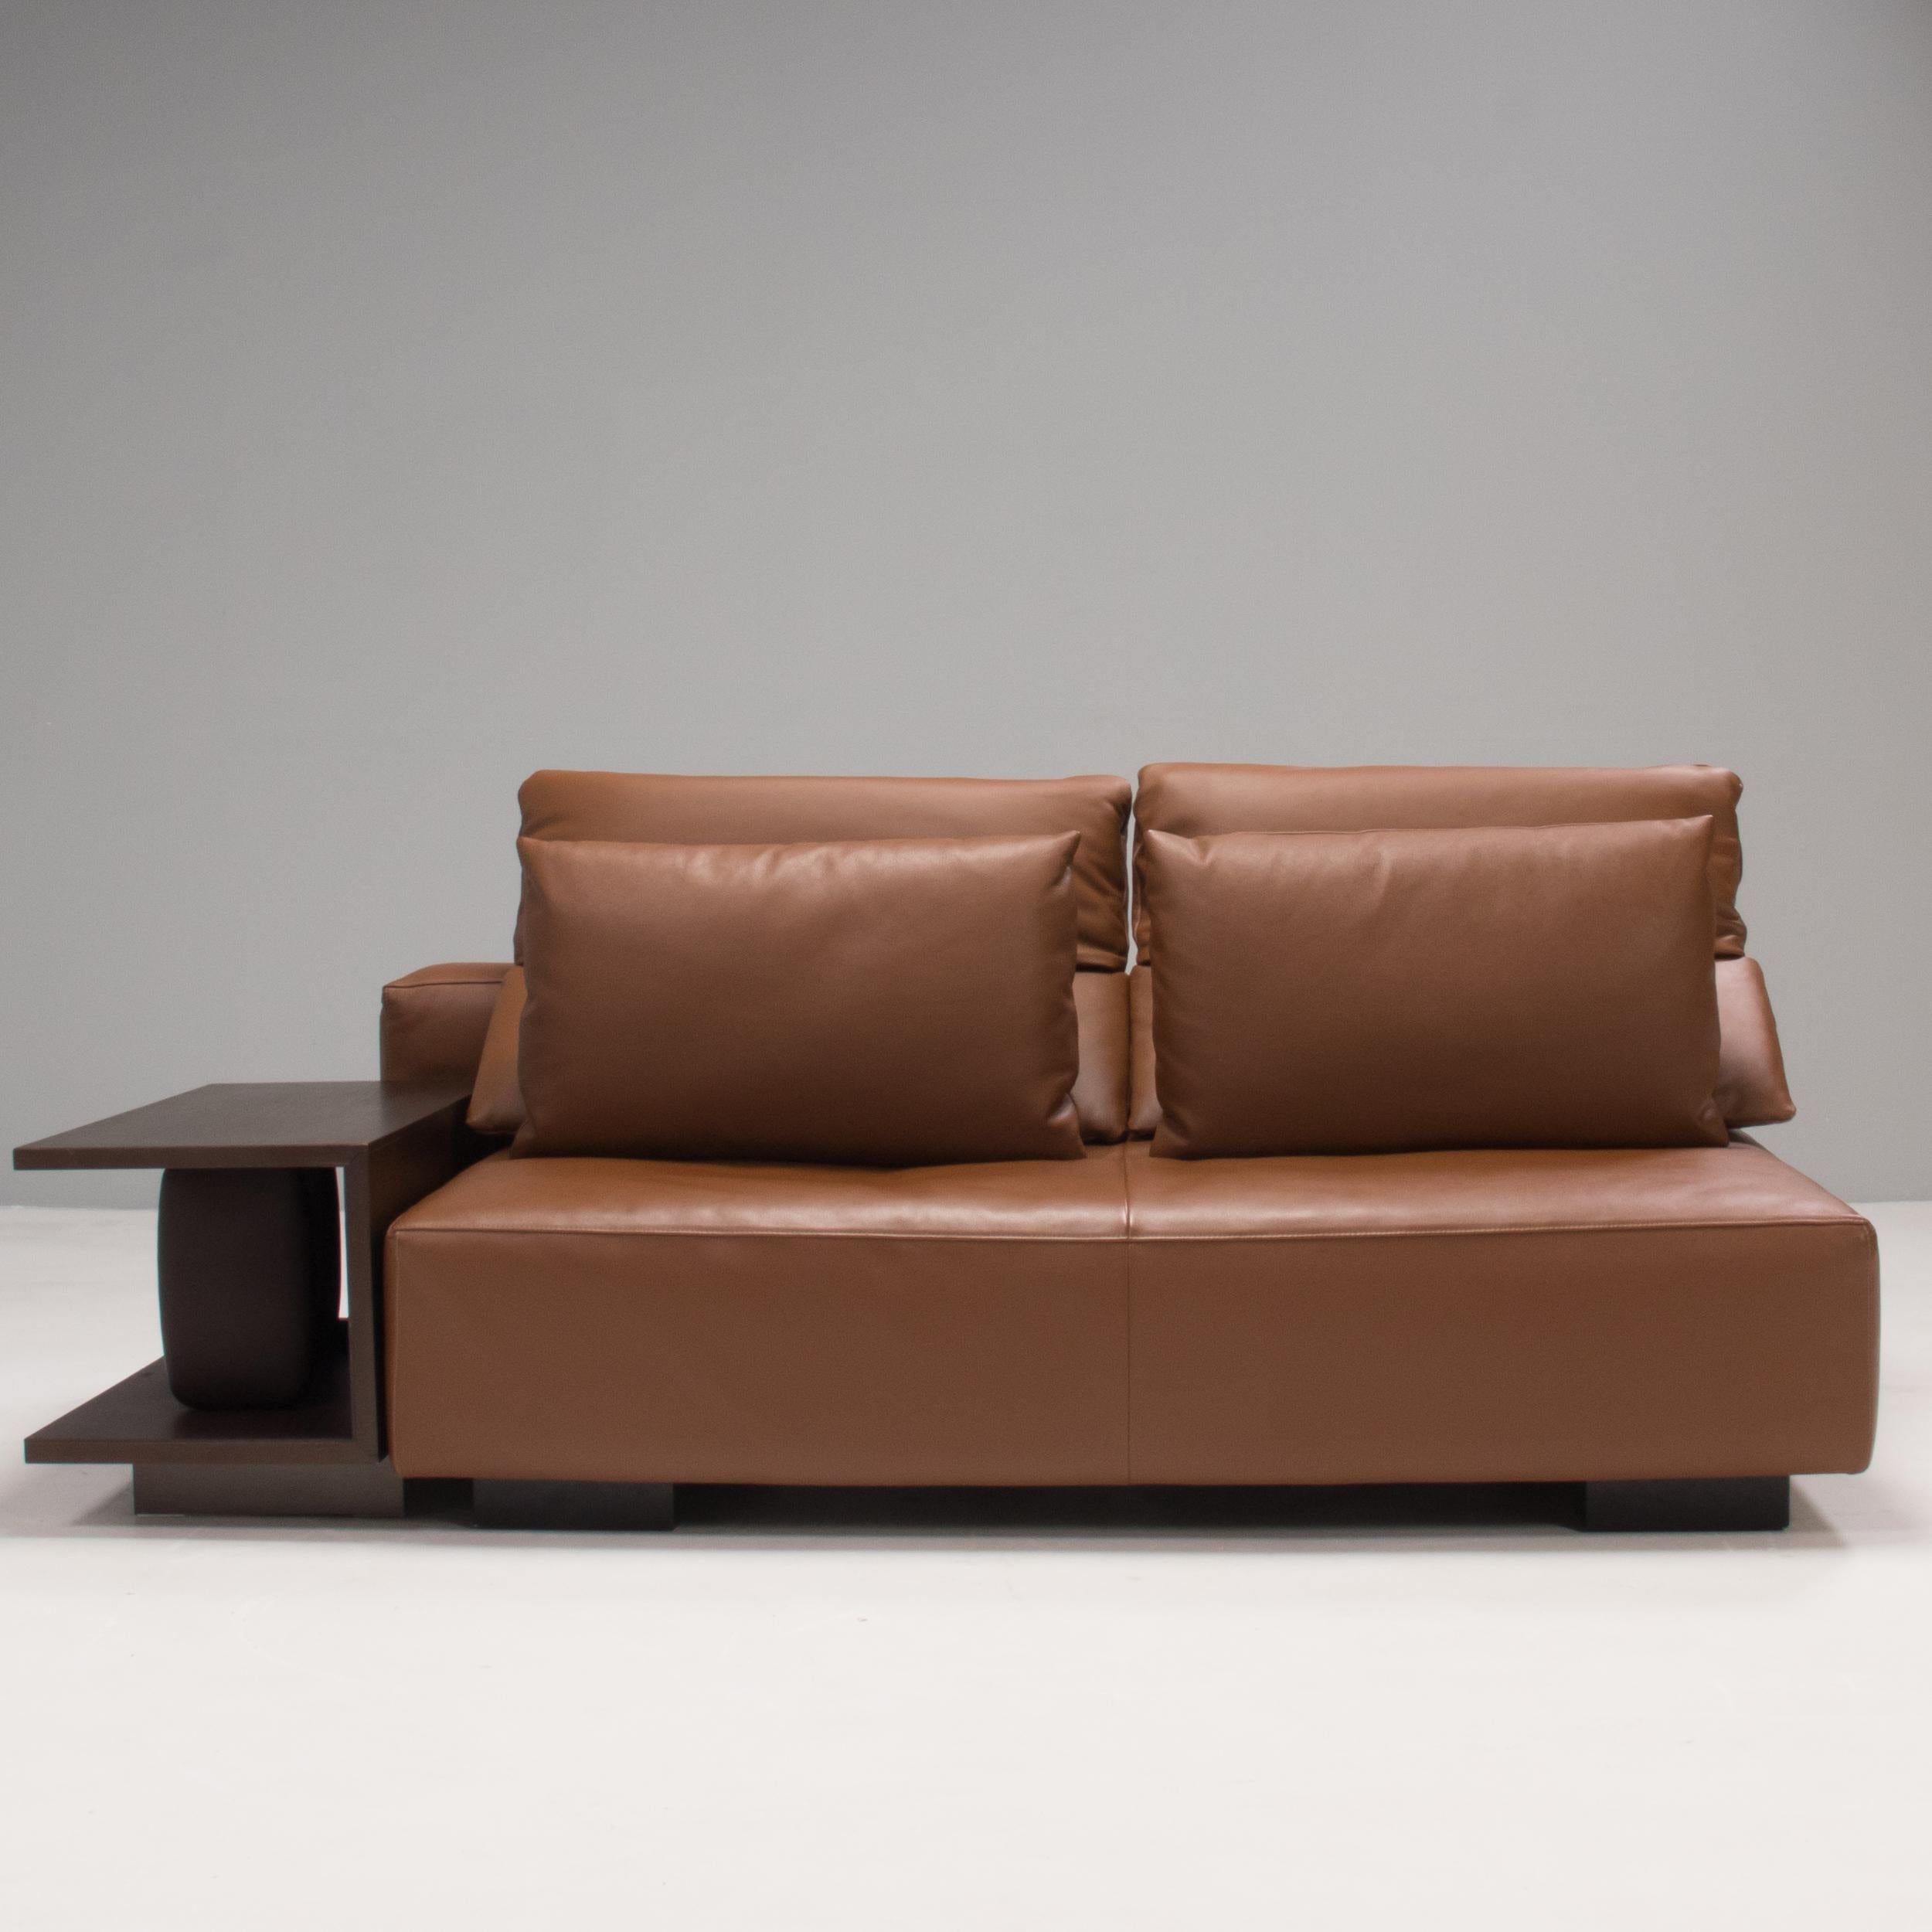 Designed by Jean-Marie Massaud for Poltrona Frau in 2015, the Bullit sofa is the perfect balance of comfort and functionality.

The sofa is fully upholstered in soft brown leather and features angled back cushions for additional support.

The